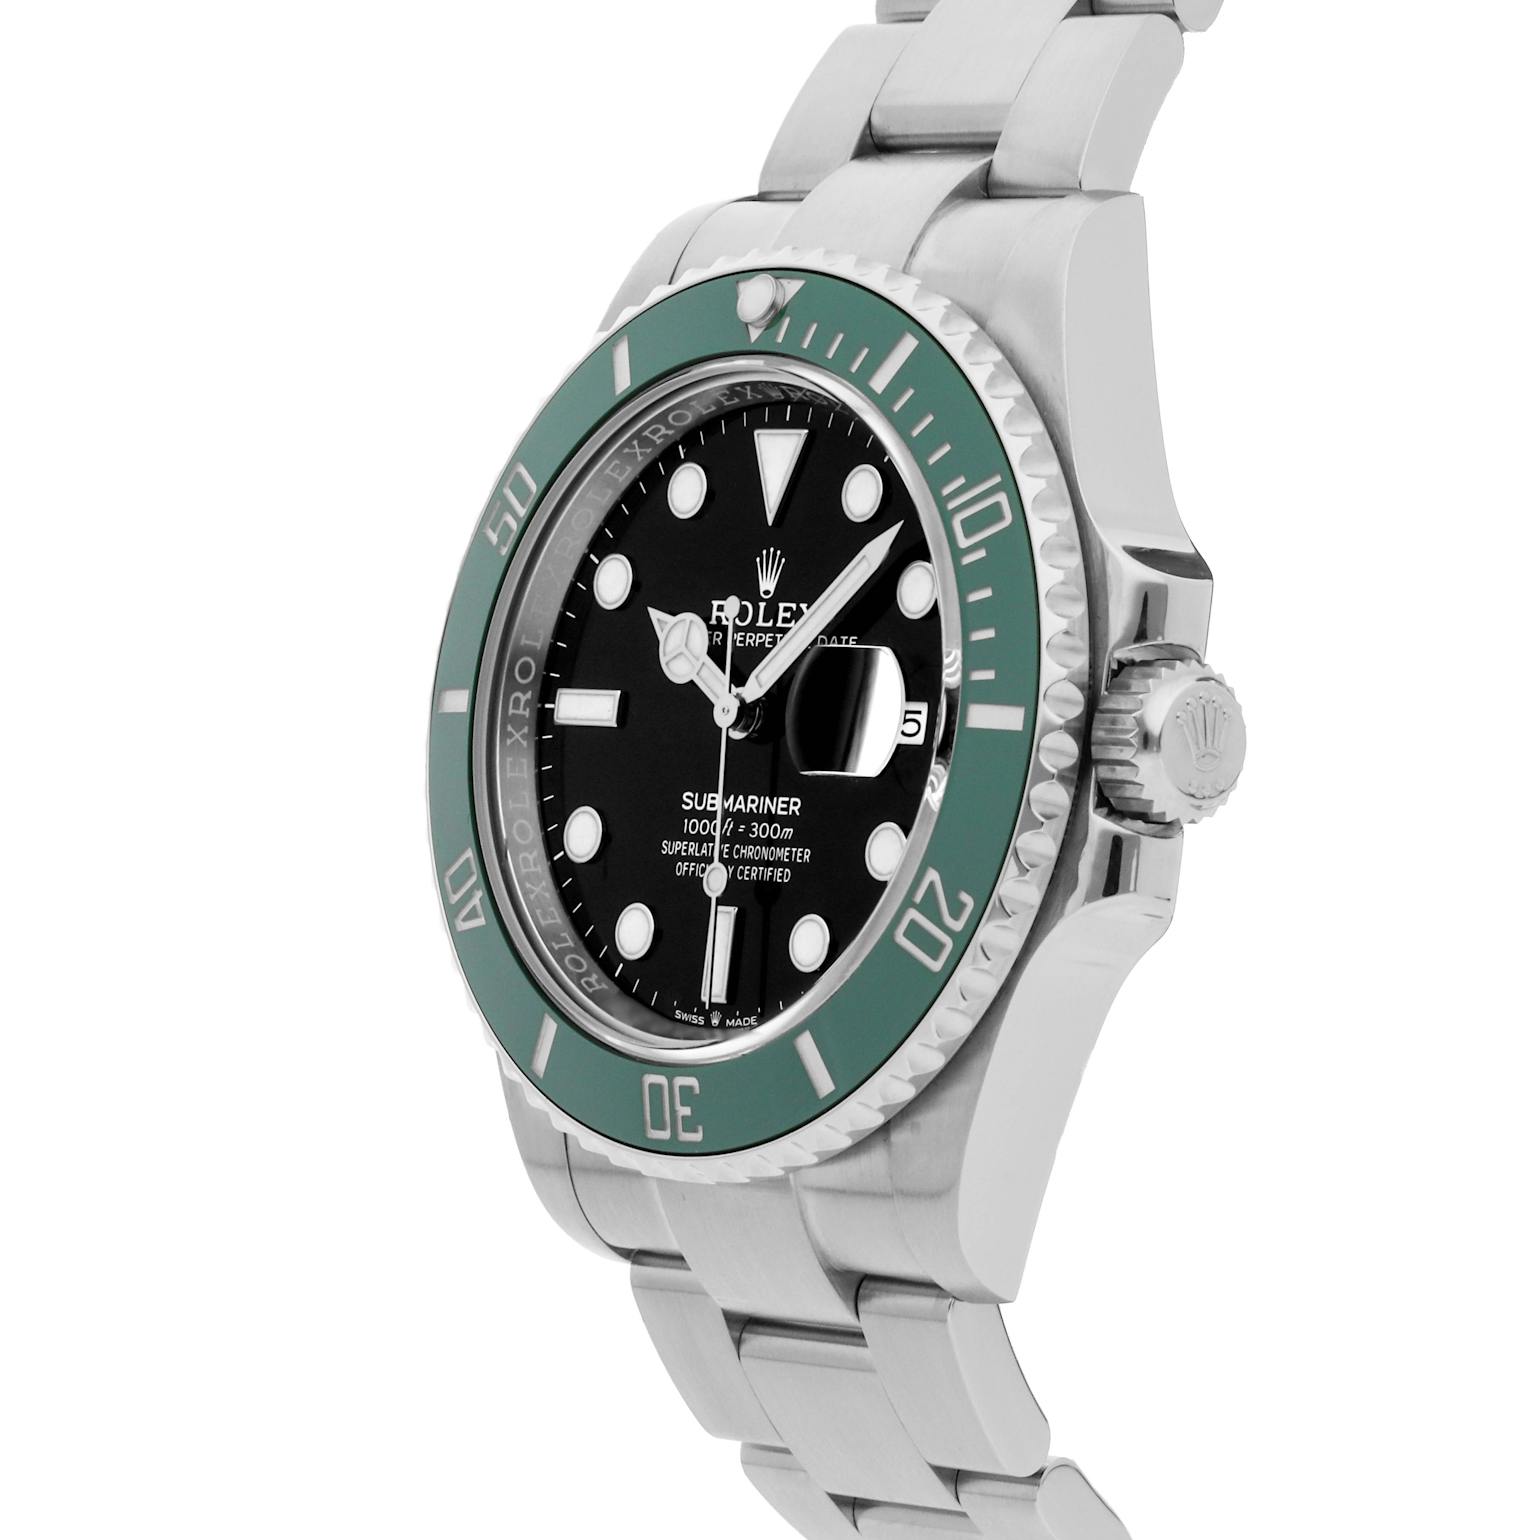 Rolex Submariner Date 126610 LV Mark II Kermit for Rs.1,441,068 for sale  from a Seller on Chrono24